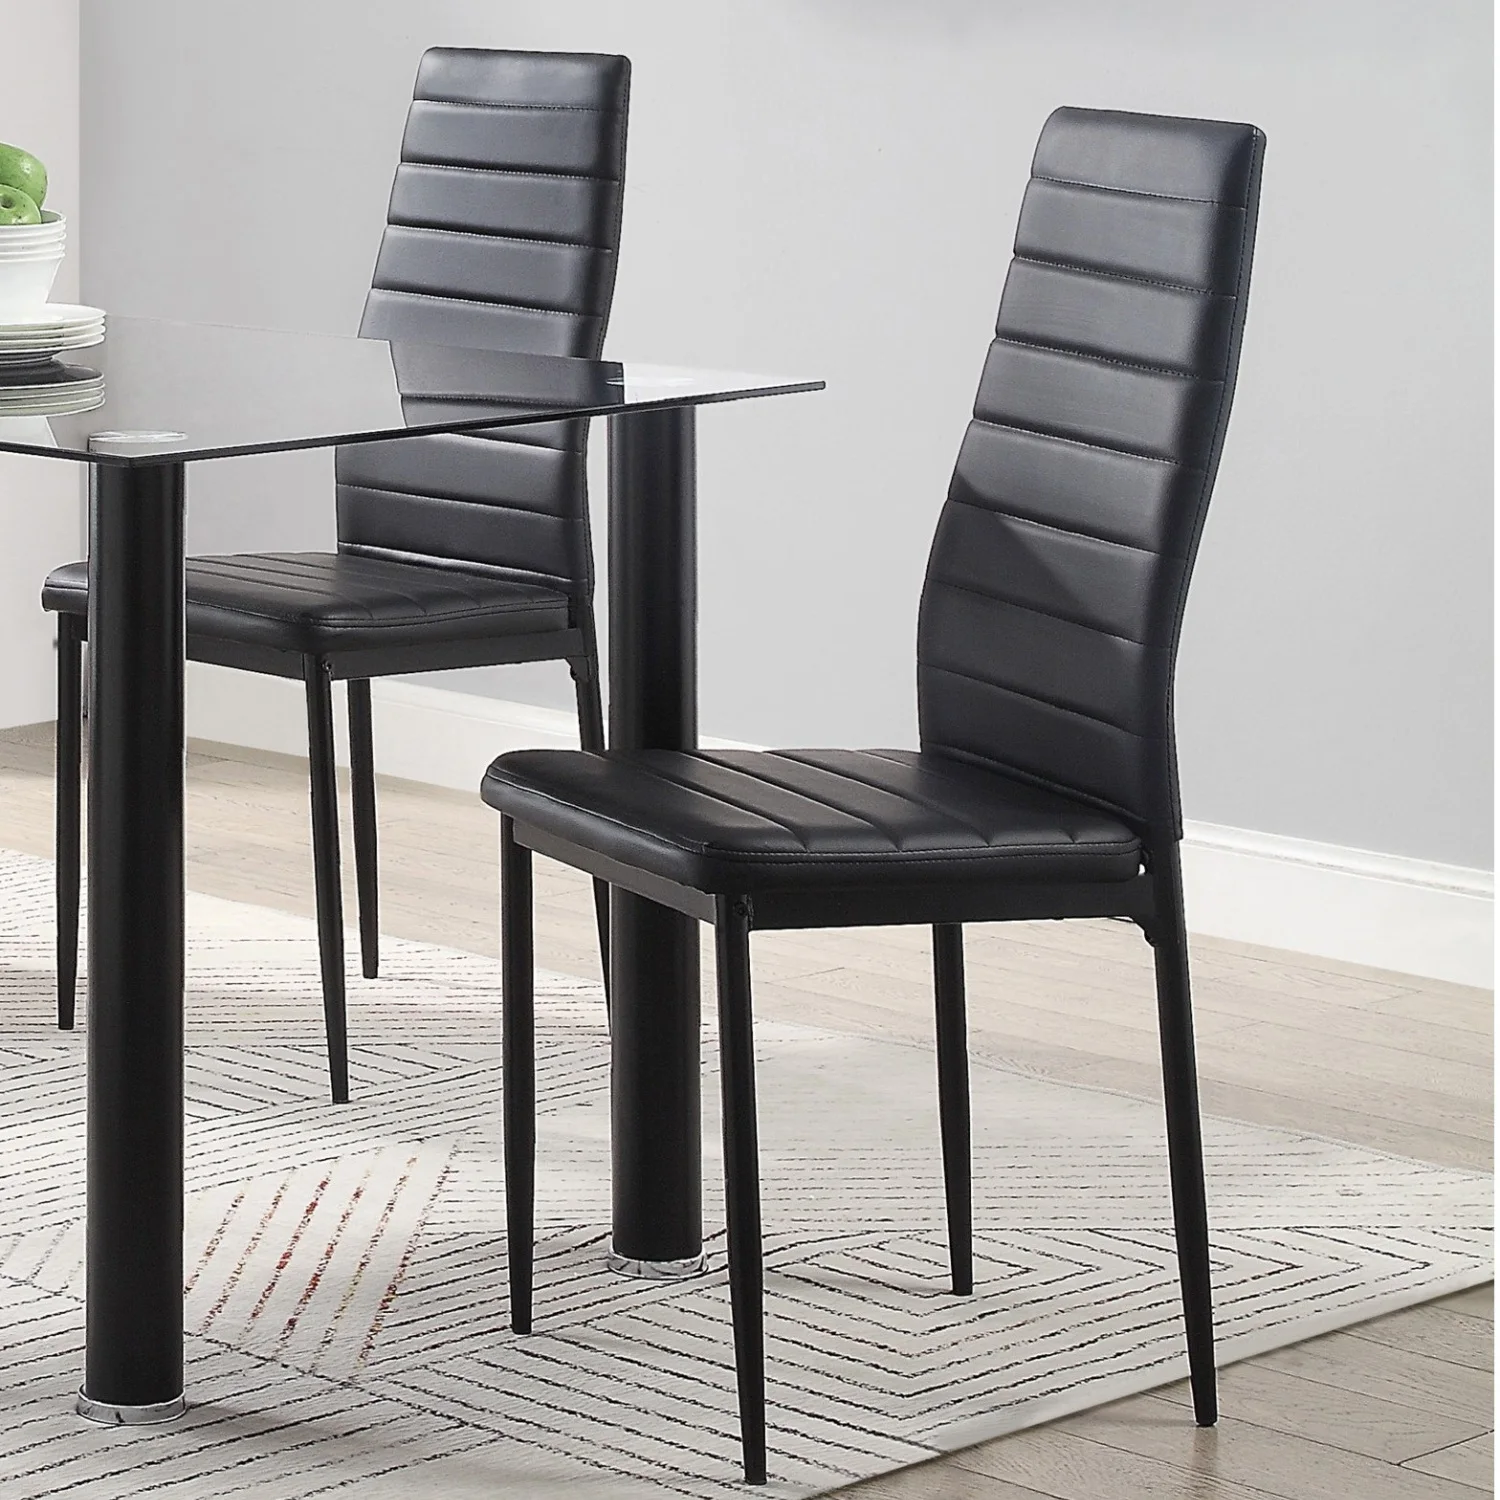 

Contemporary Black Metal Finish Side Chairs Set of 2 with Modern Styling and Faux Leather Upholstery - Upgrade Your Dining Room